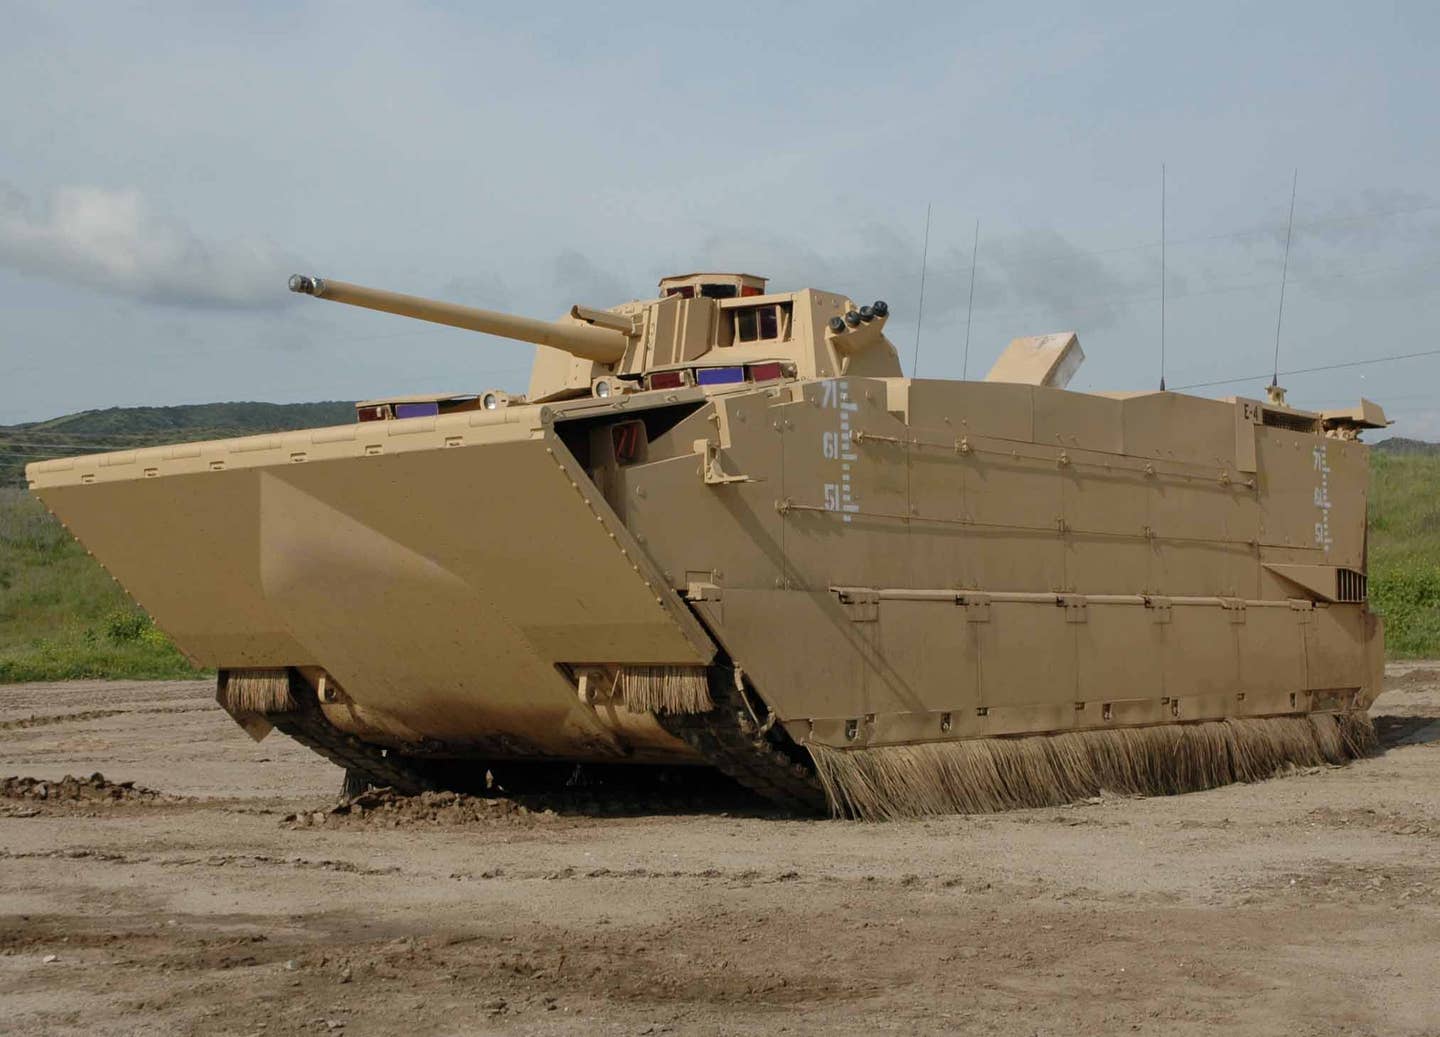 A prototype of the Expeditionary Fighting Vehicle, planned for deployment to the United States Marine Corps before it was cancelled. (USMC photo)